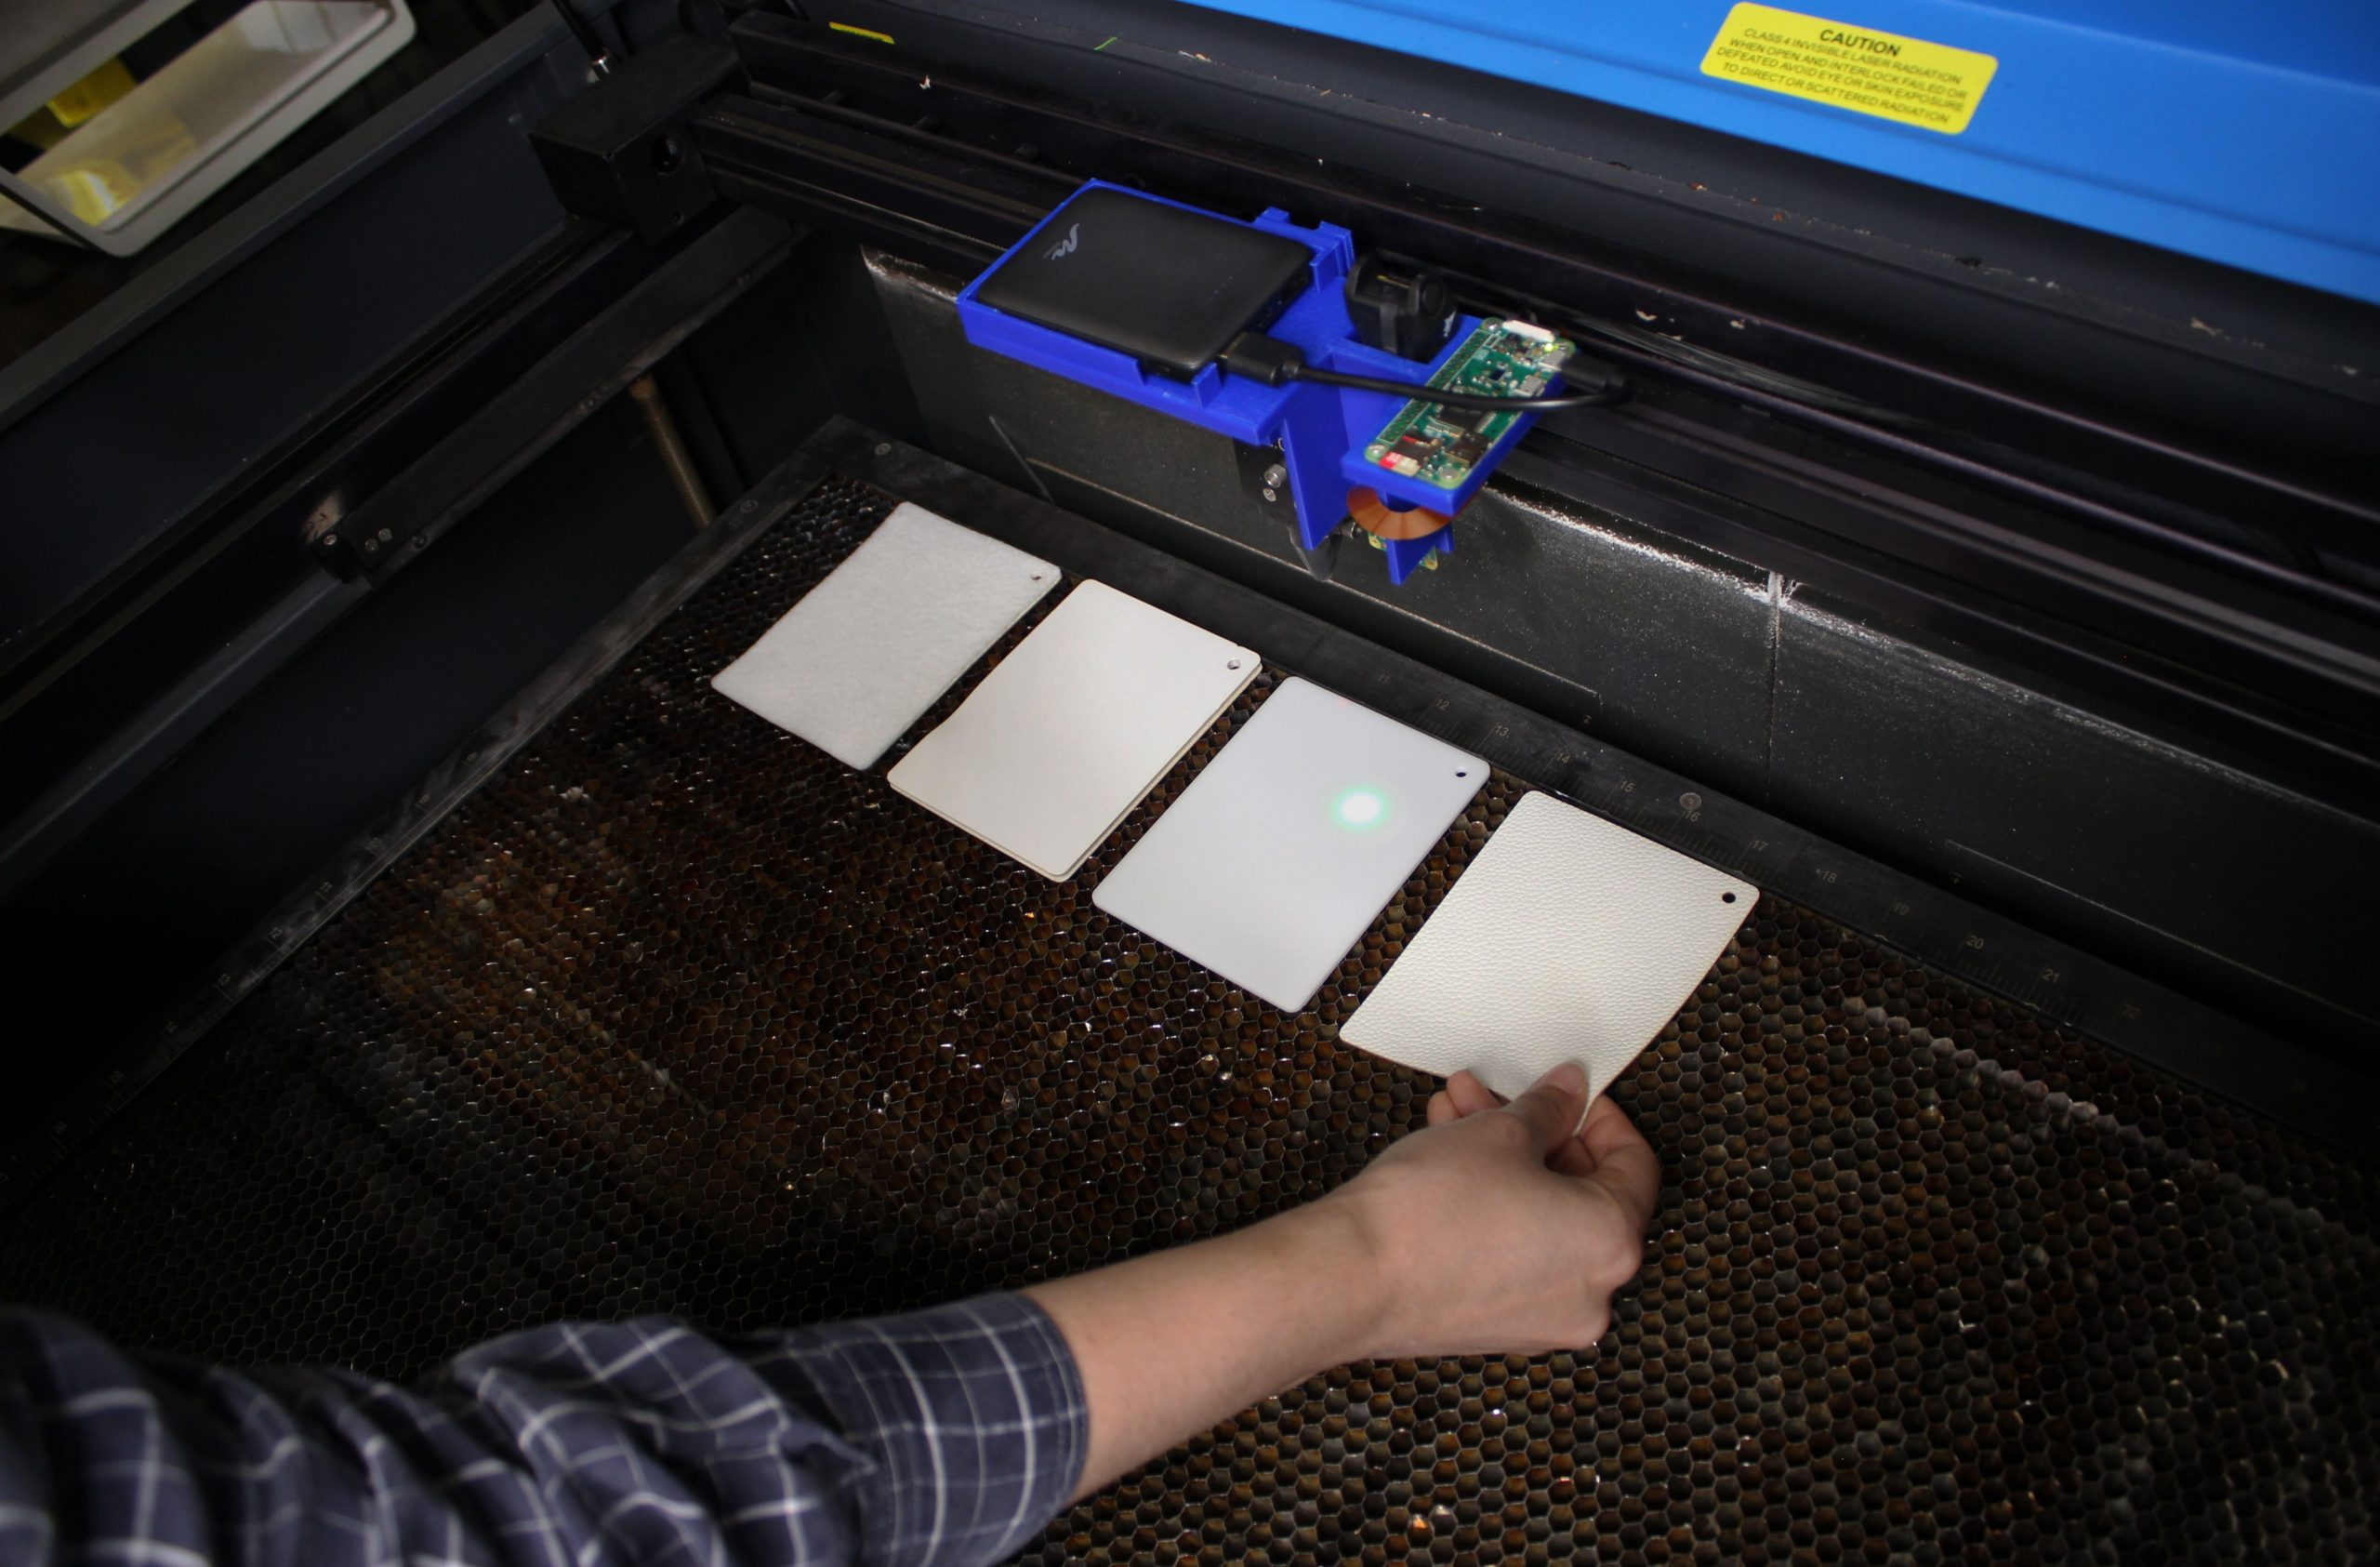 Smart laser cutter system detects different materials | MIT News